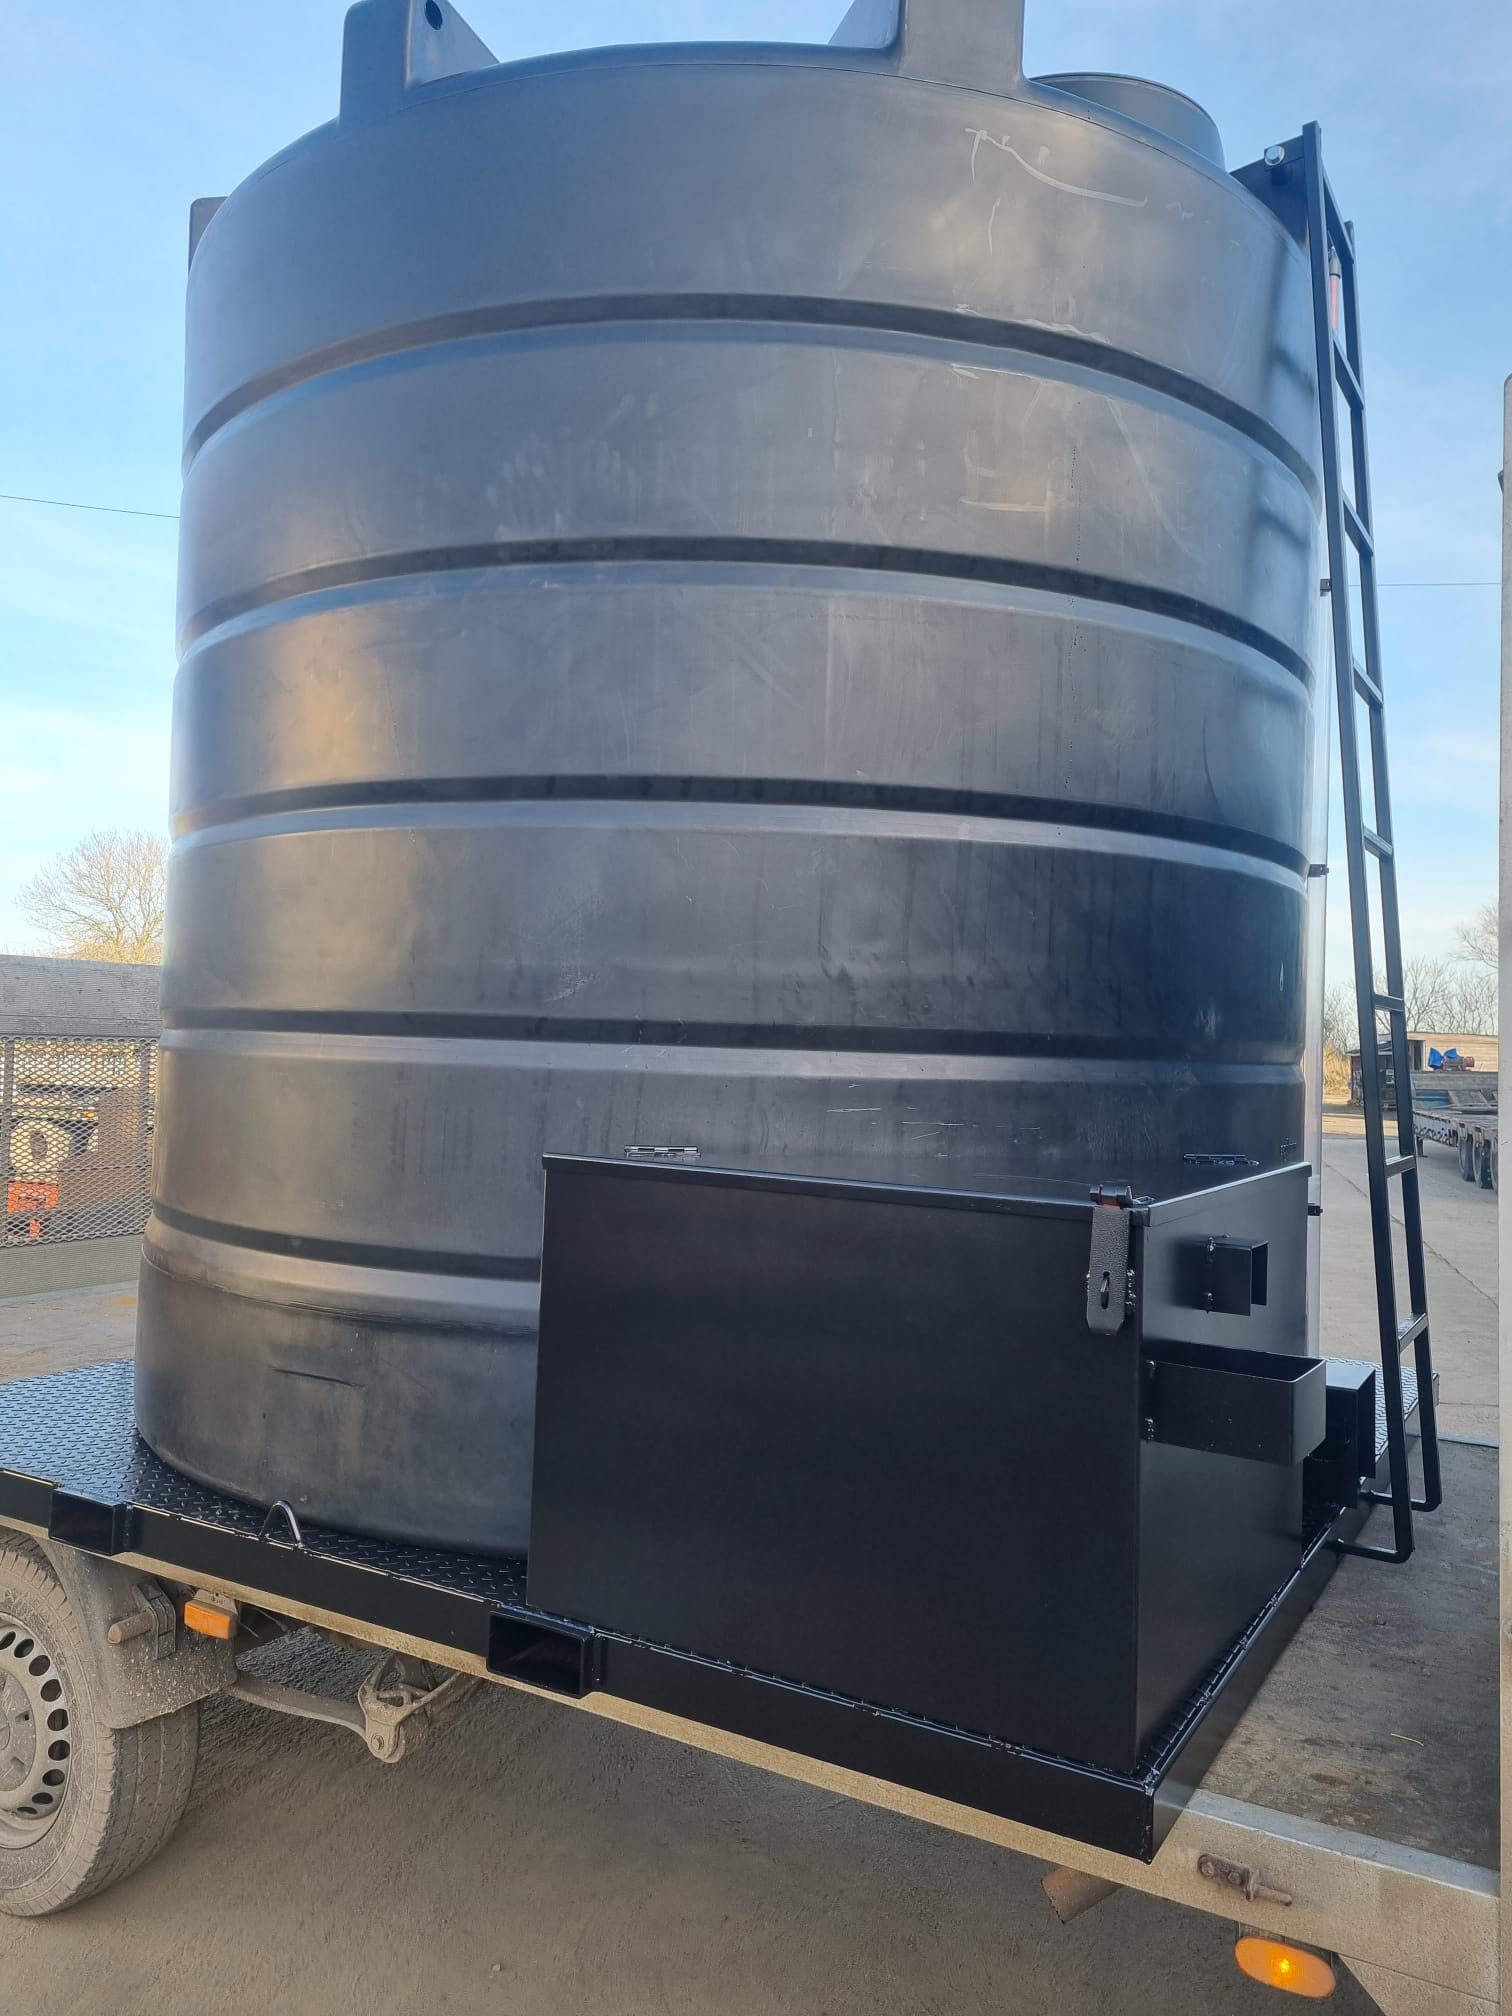 Affordable 10,000ltr Water Tank, With On Demand Pump